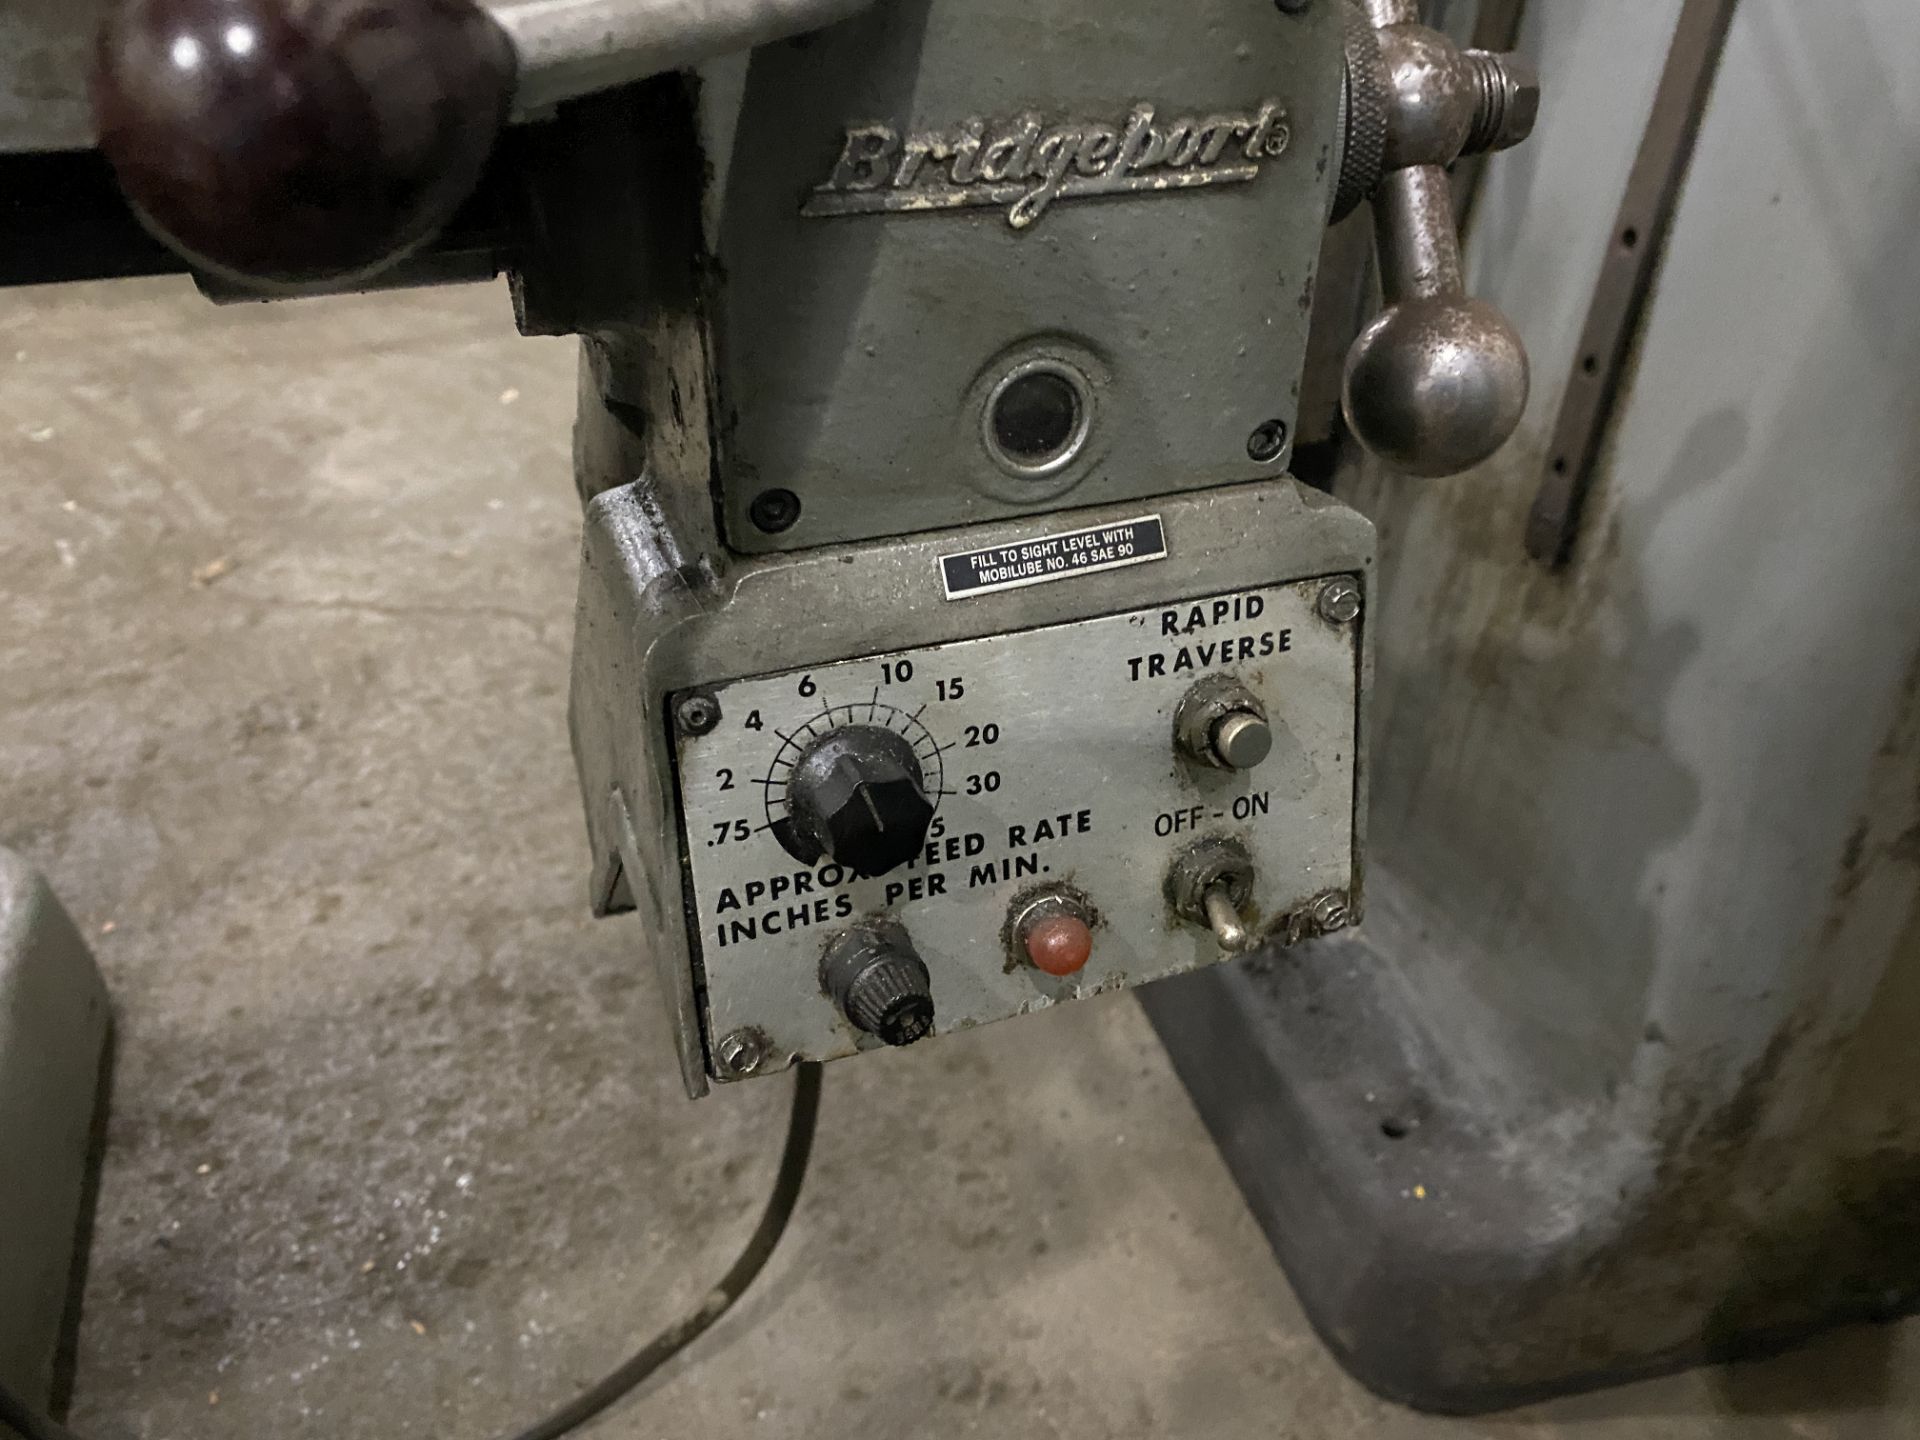 Bridgeport Series I Vertical Mill, 9" x 48", Variable Speed w/DRO - Image 8 of 10